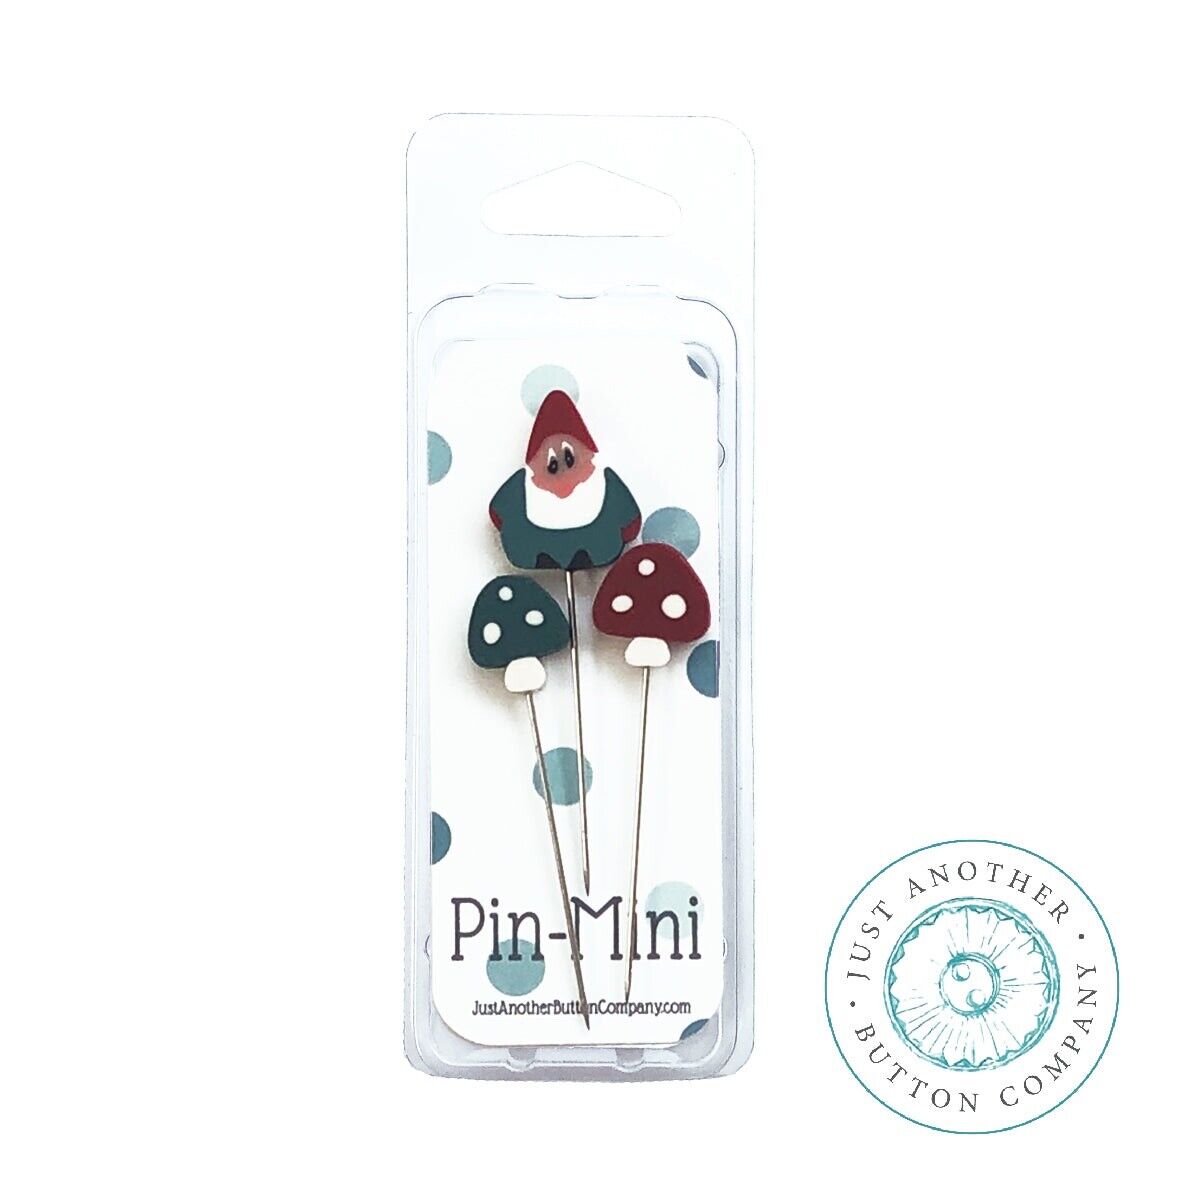  jpm484 Gnomeland  (Limited Edition) : Pin-Mini  by Just Another Button Company 